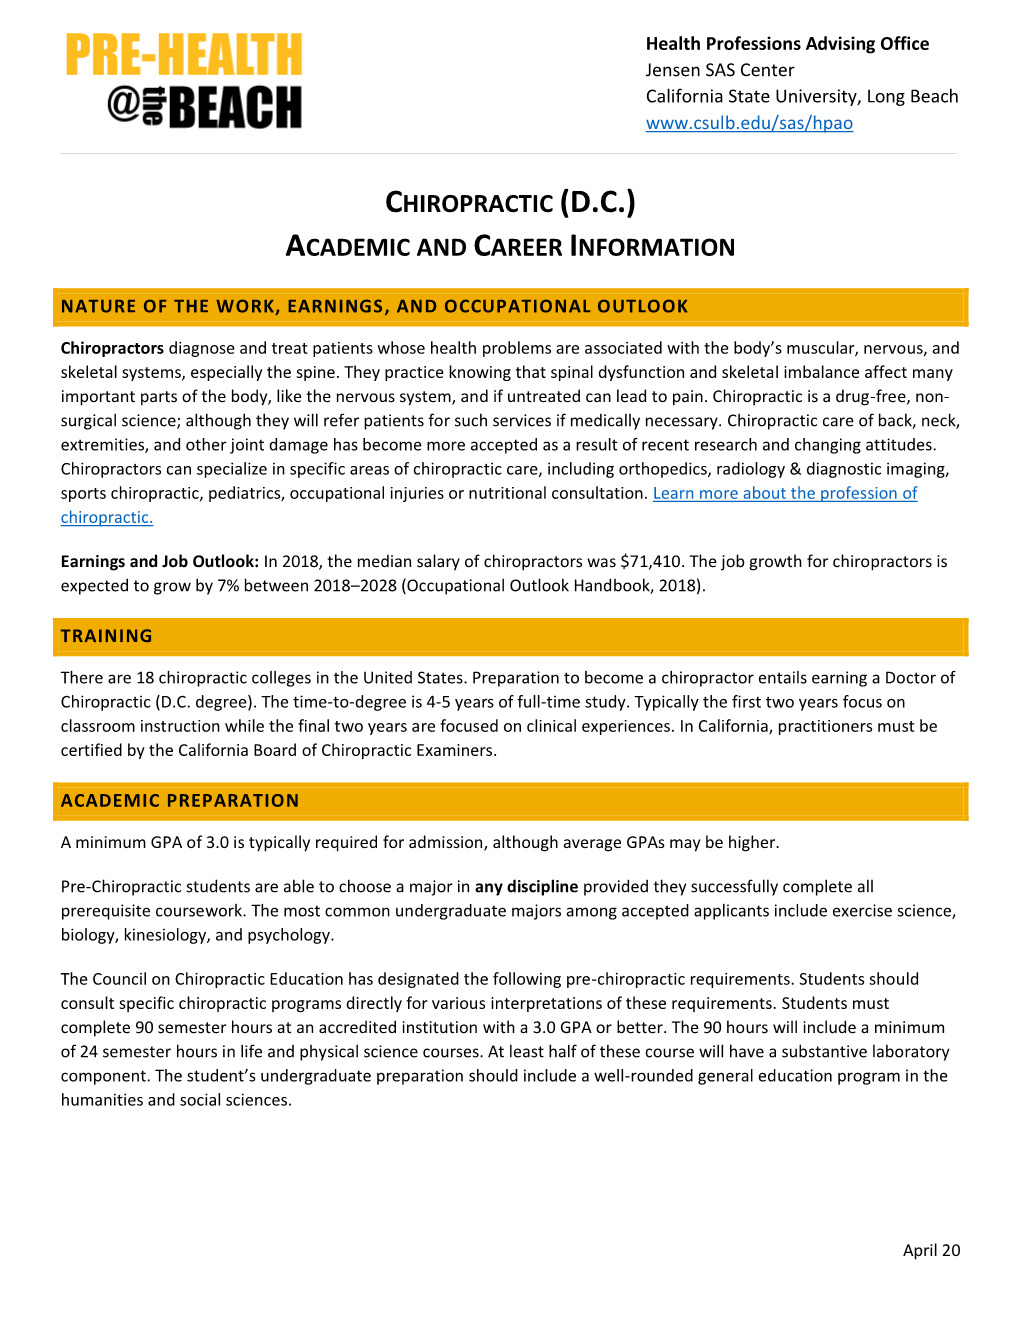 Chiropractic (Dc) Academic and Career Information